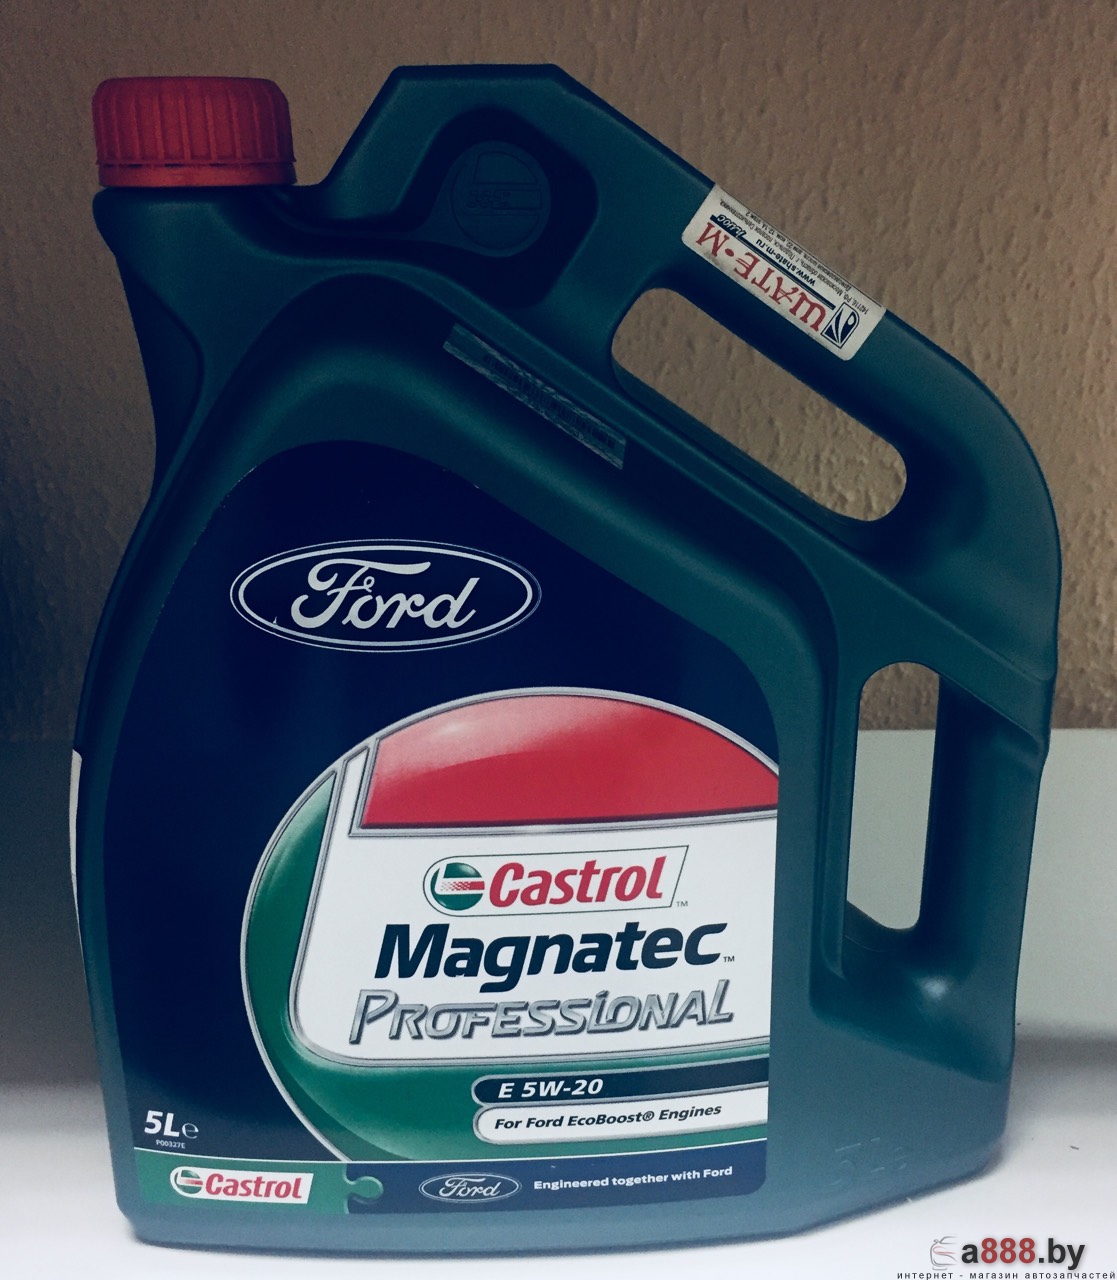 Масло castrol ford. Ford Magnatec 5w-20 5л.. Castrol 5w20 Ford. Castrol Magnatec professional 5w20 Ford. Масло Ford Castrol Magnatec e 5w20.